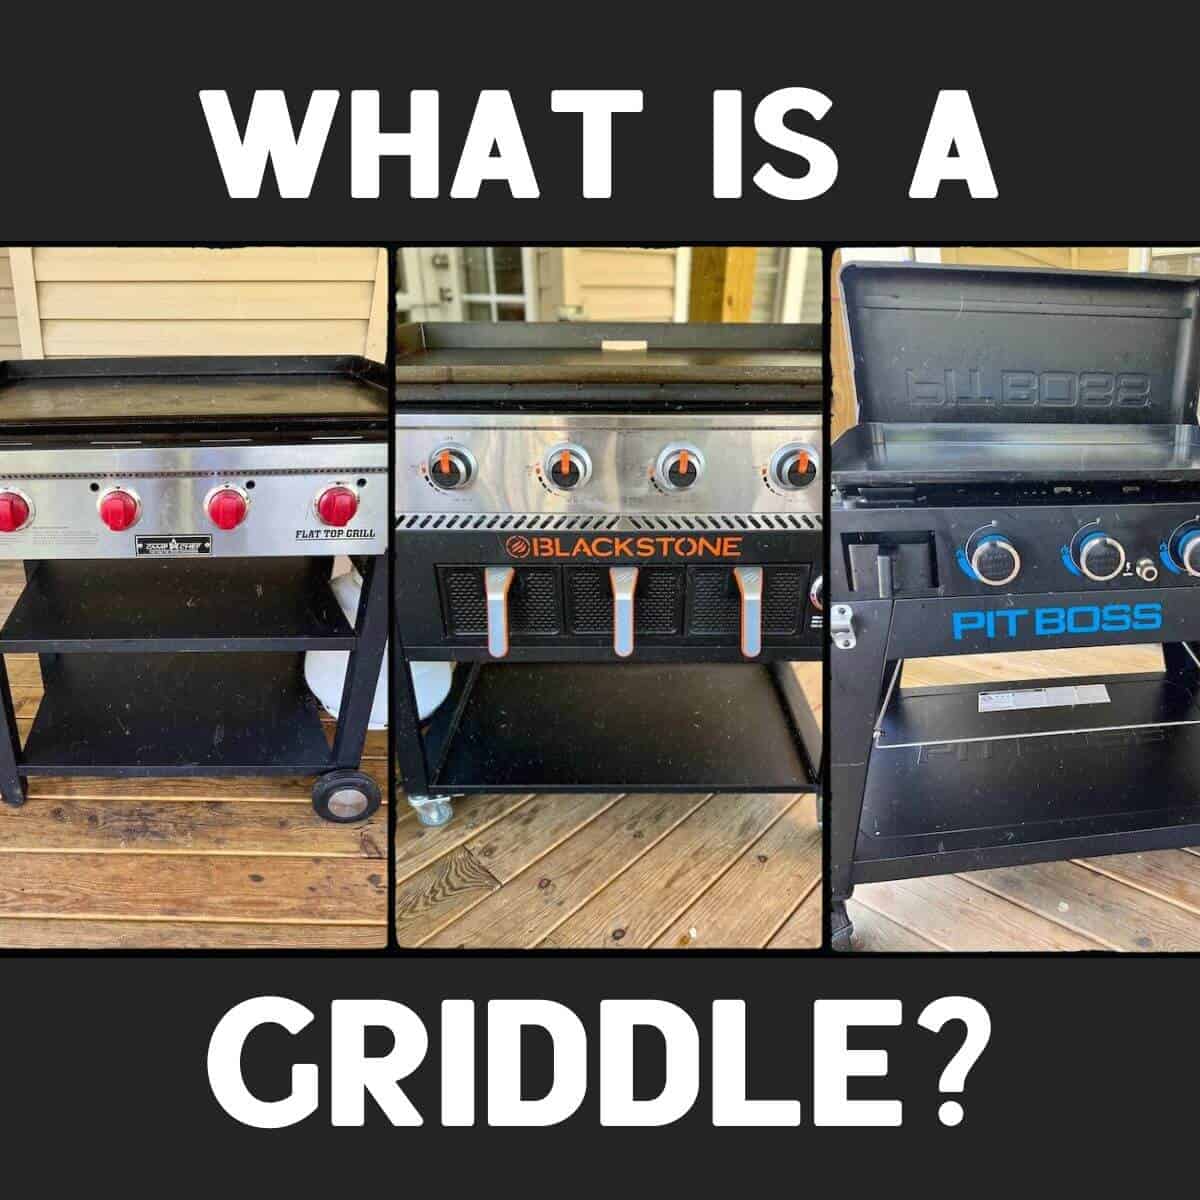 https://theflattopking.com/wp-content/uploads/2023/01/what-is-a-griddle.jpg